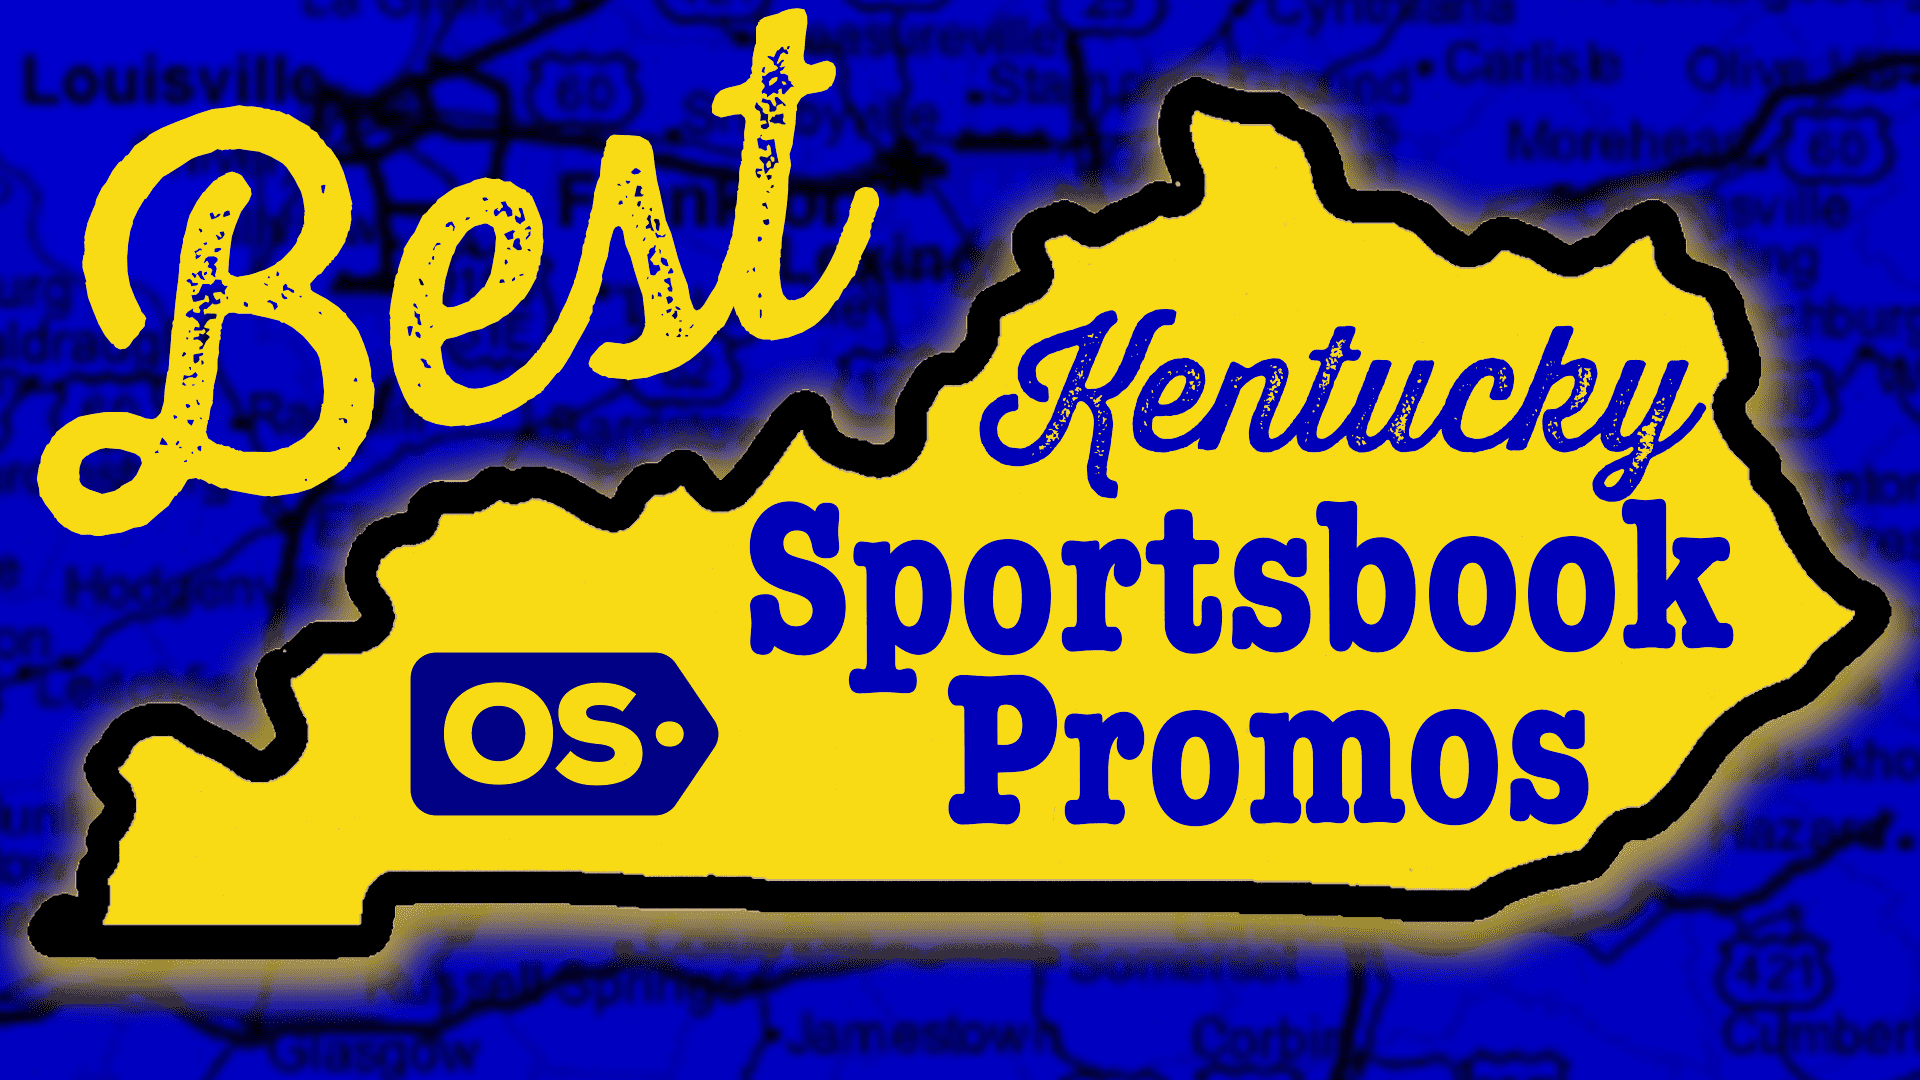 Best Kentucky Sports Betting Promo Codes: How to Claim $815 in Pre-Registration Offers